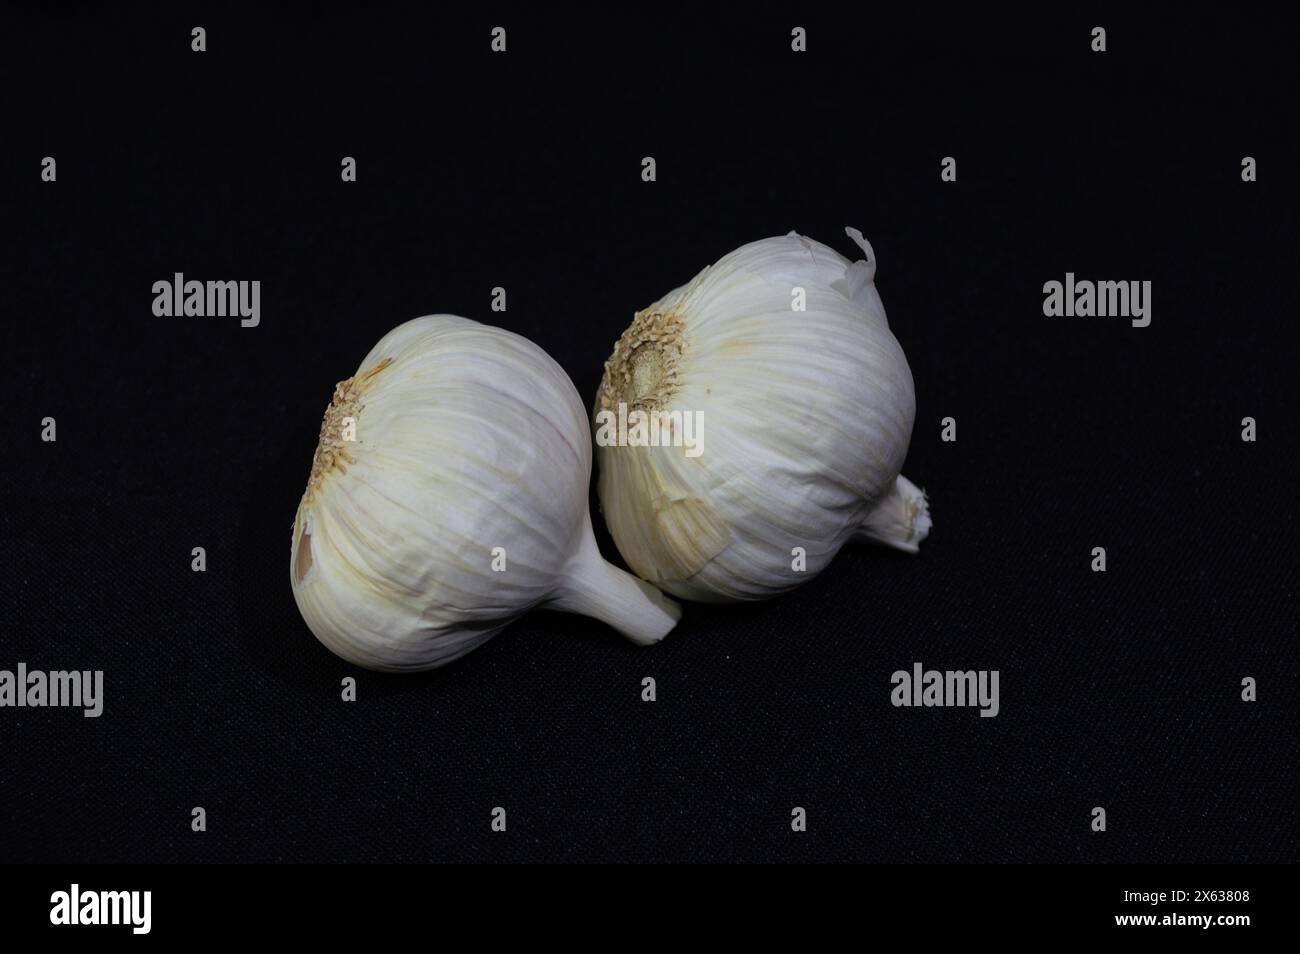 Garlic, tasty and healthy seasoning for foods Stock Photo